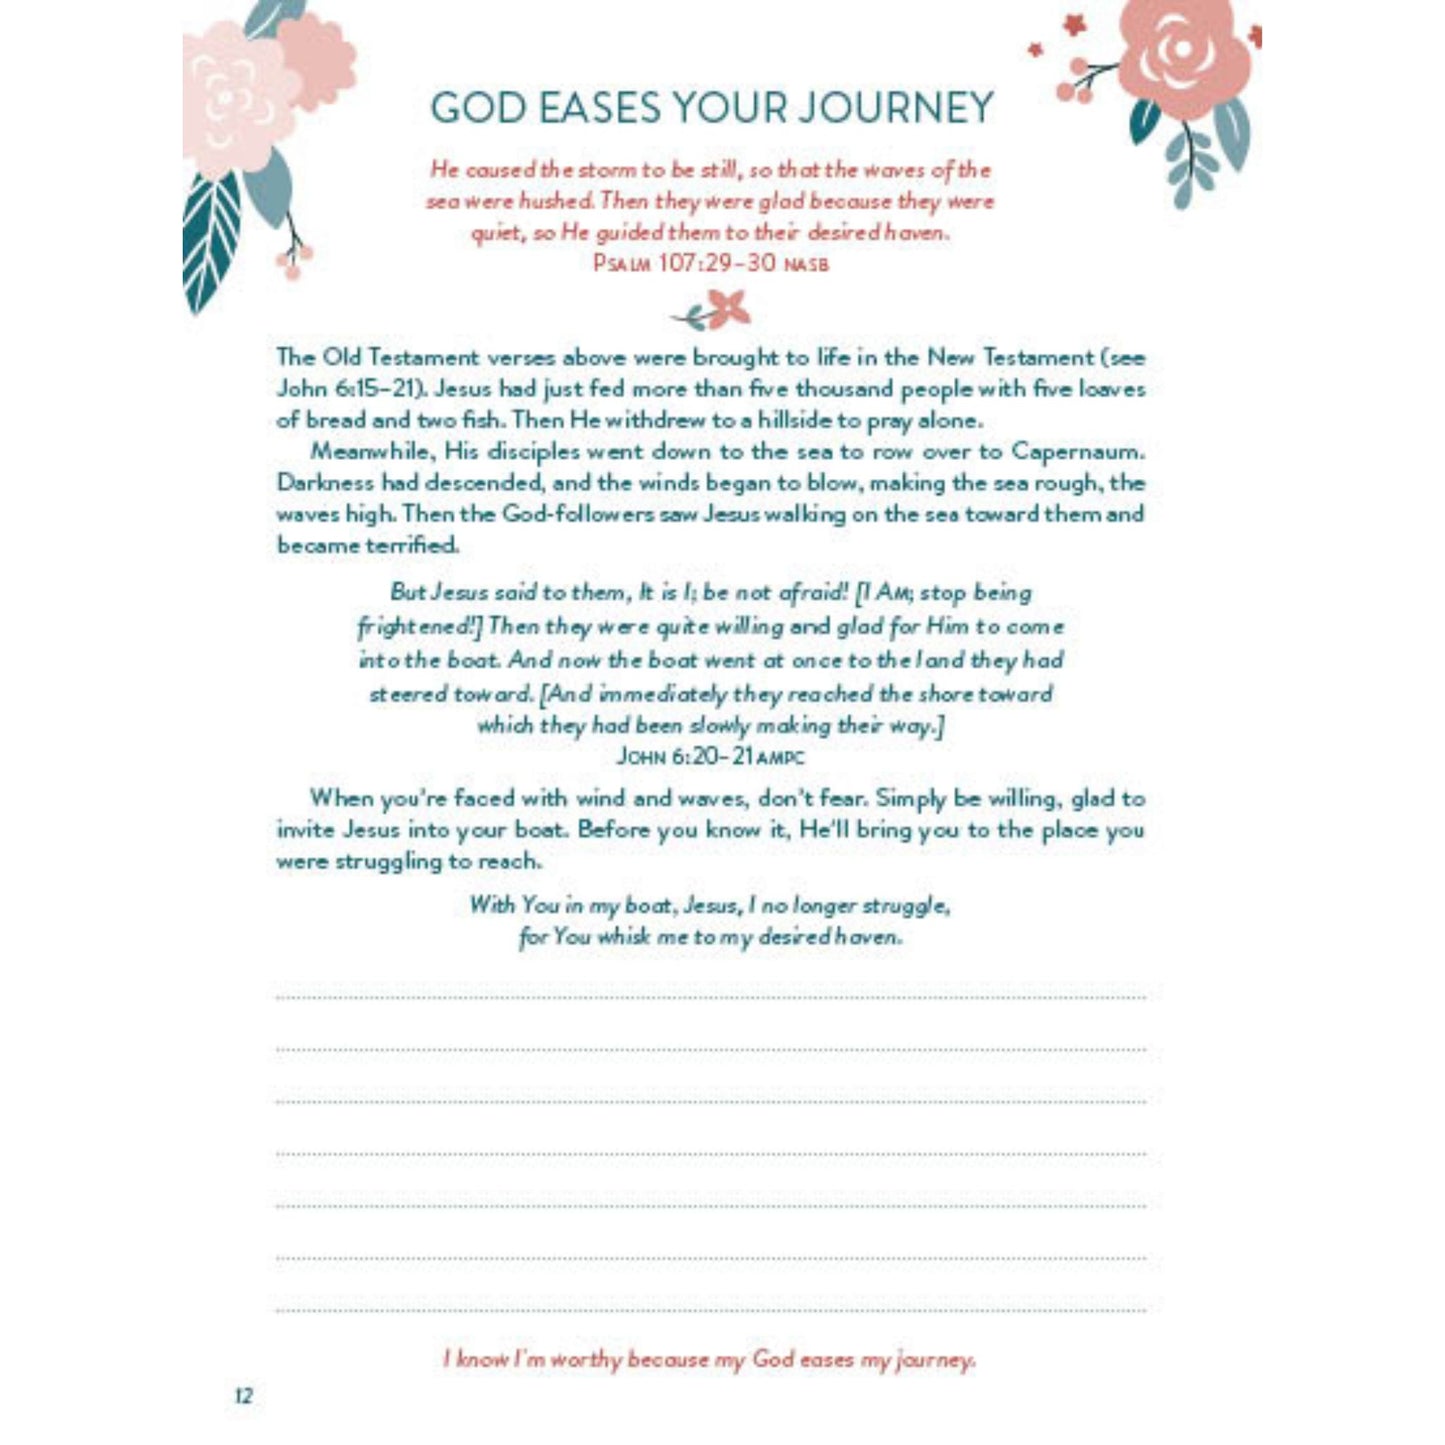 Interior of "You Matter: A Devotional Journal for Women" featuring comforting readings and prayers.